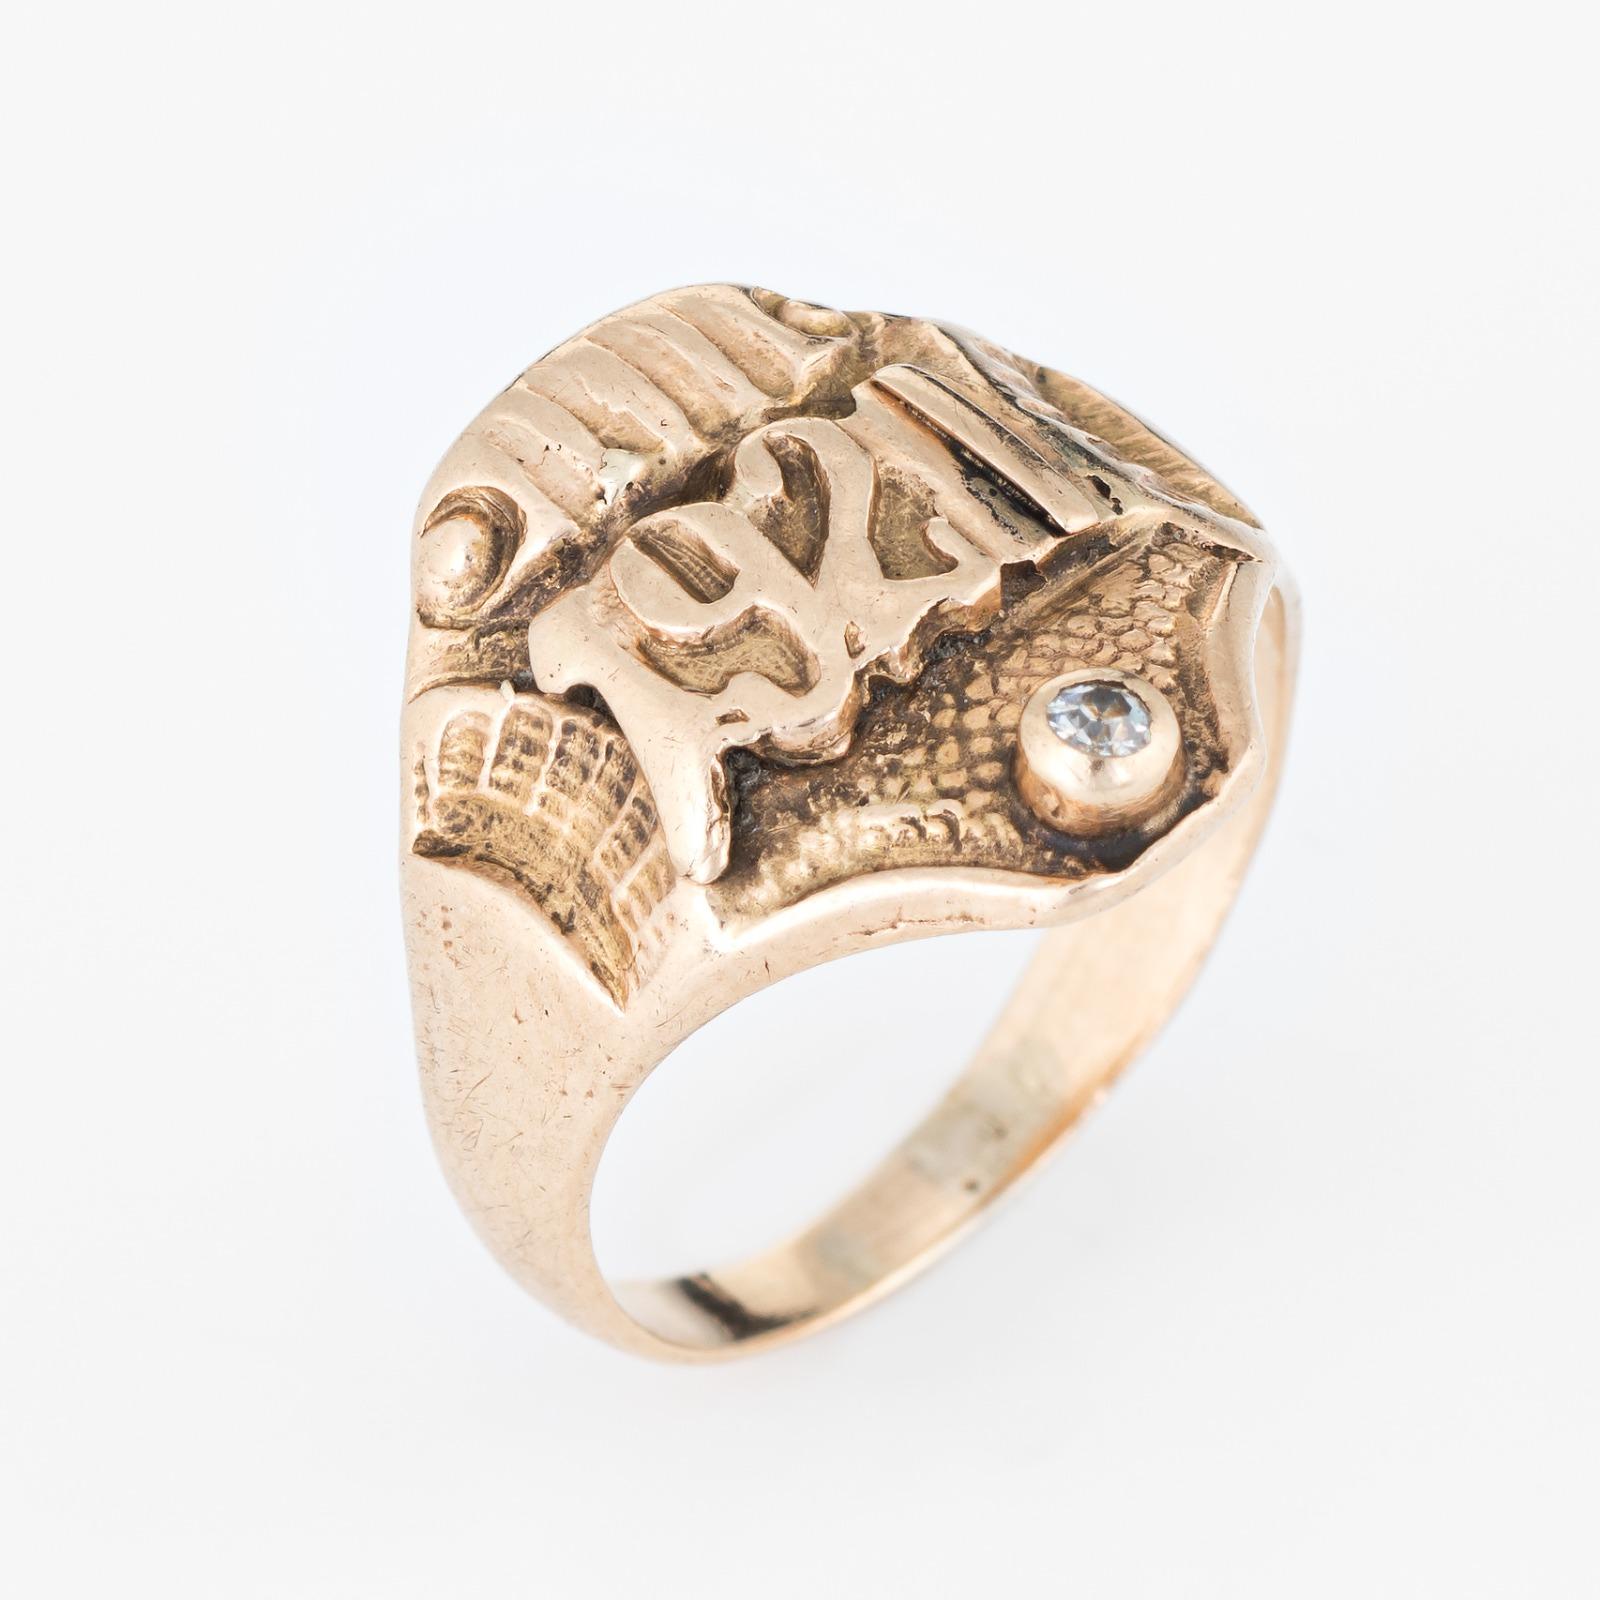 Lovely antique Art Deco signet ring (circa 1921), crafted in 14 karat yellow gold. 

One estimated 0.03 carat old mine cut diamond is set into the mount (estimated at H-I color and I1 clarity). 

Officially an antique ring this year at 100 years